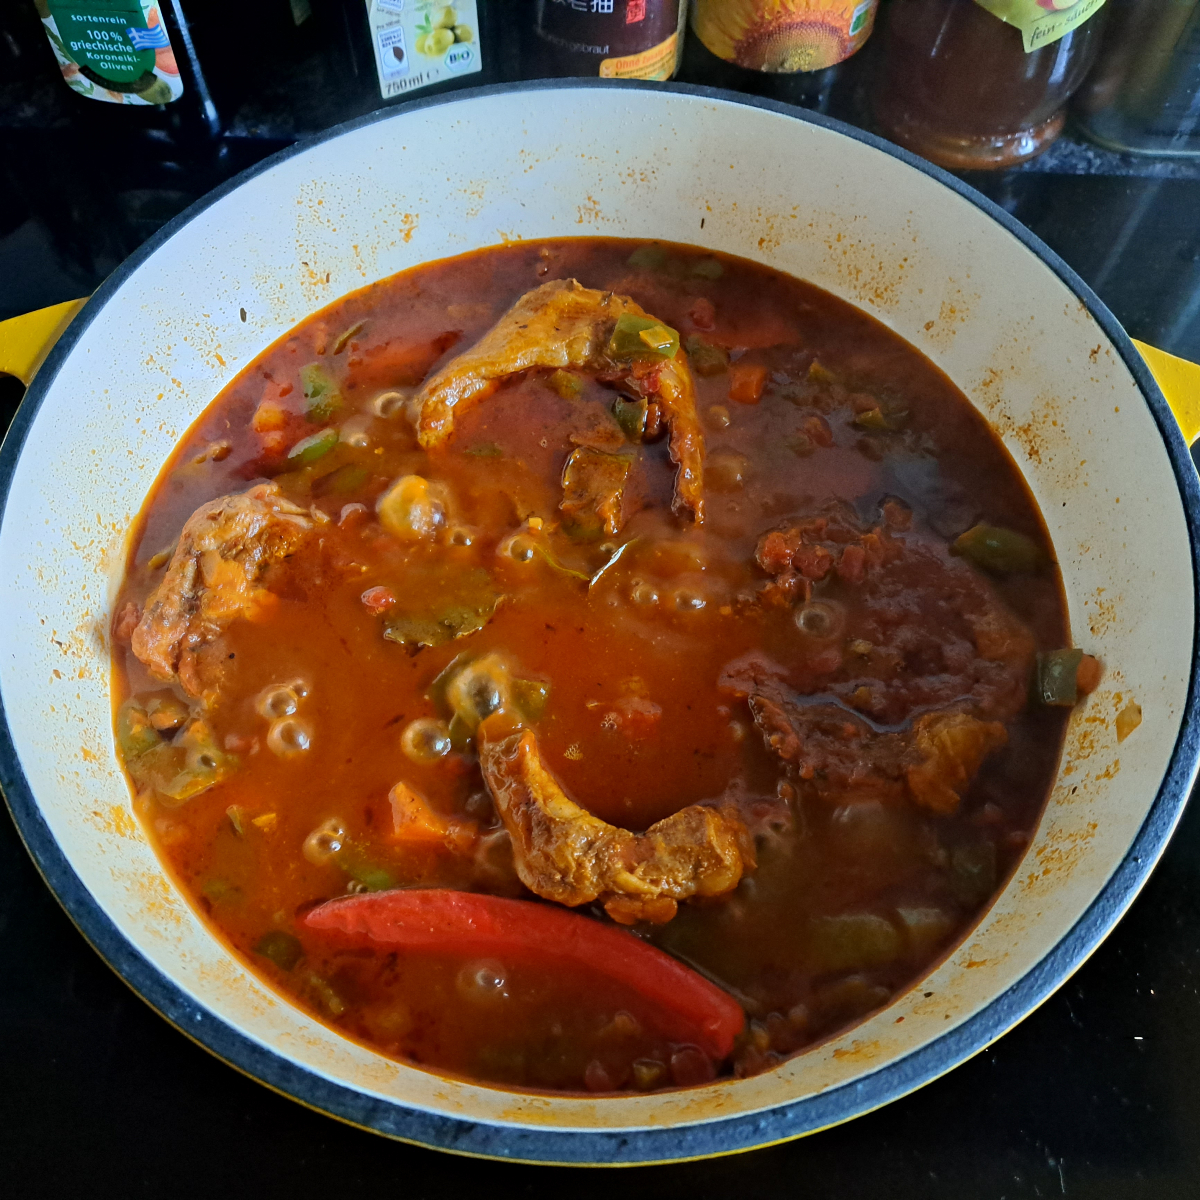 Image capturing lamb stew after 90 minutes of cooking, with the cover being lifted to reduce the sauce, revealing a tantalizing, simmered dish.